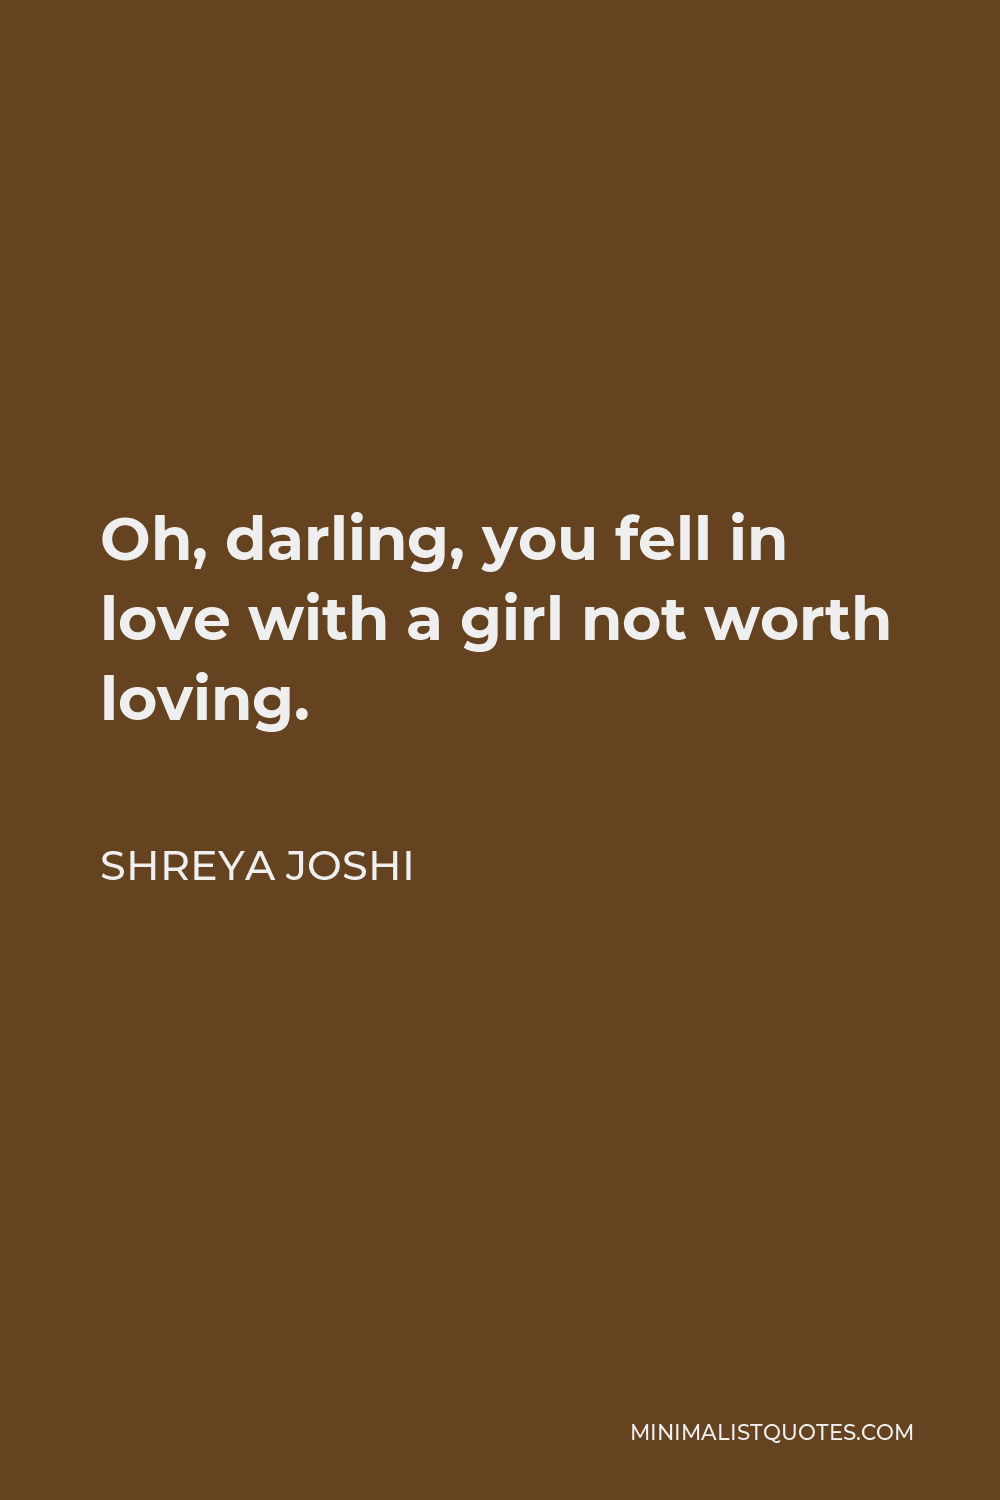 Shreya Joshi Quote - Oh, darling, you fell in love with a girl not worth loving.